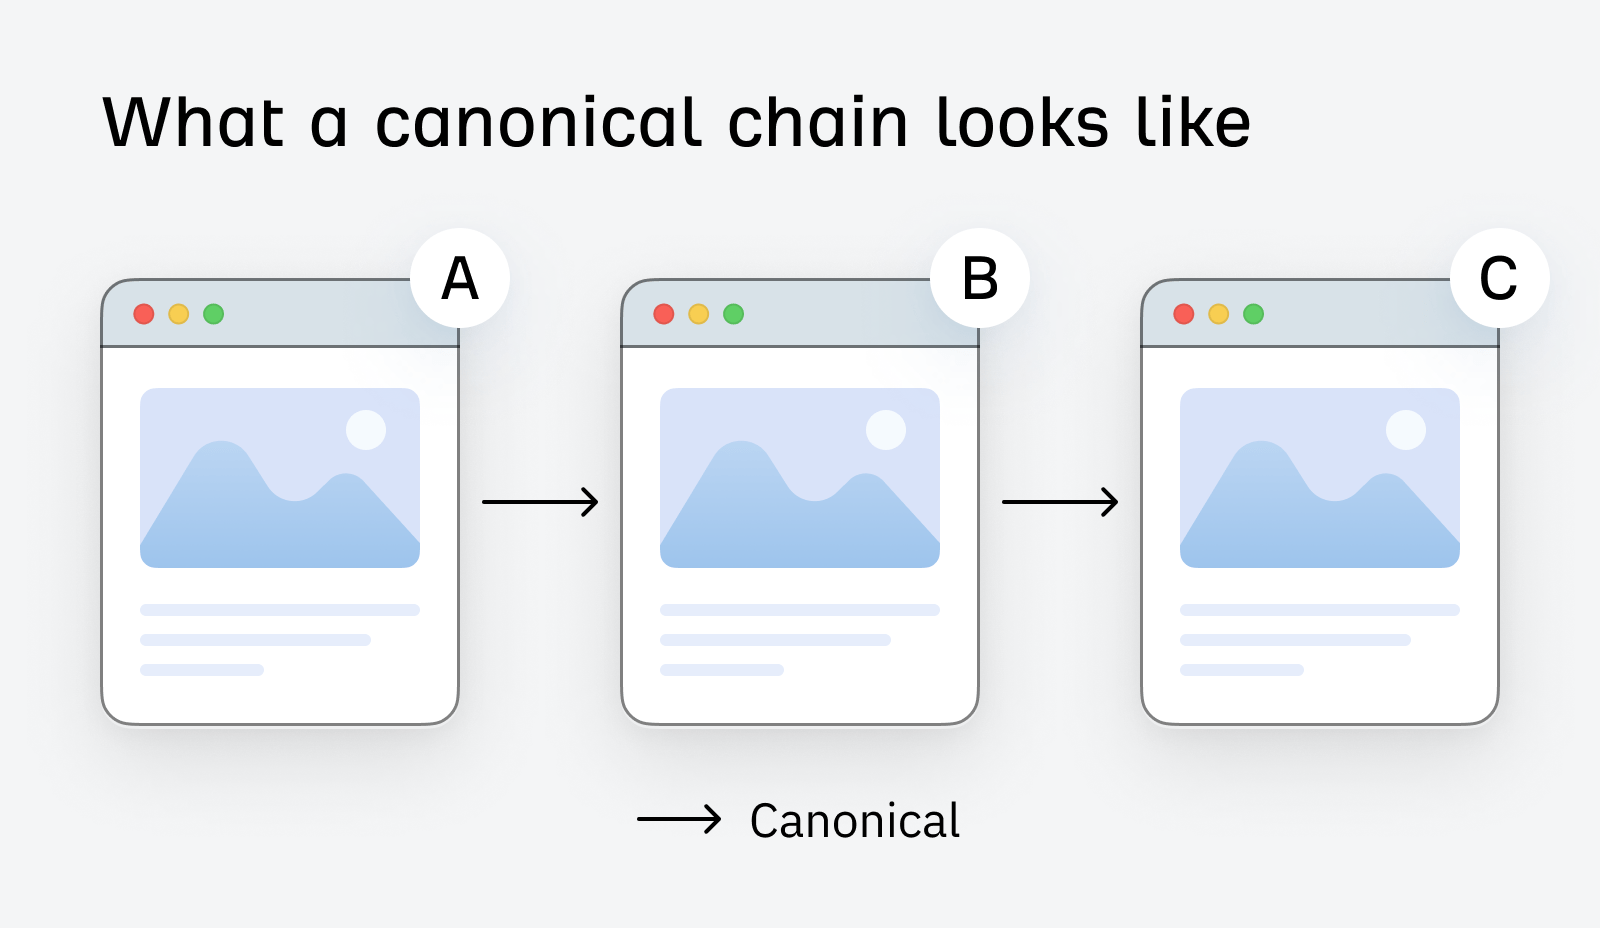 What a canonical chain looks like